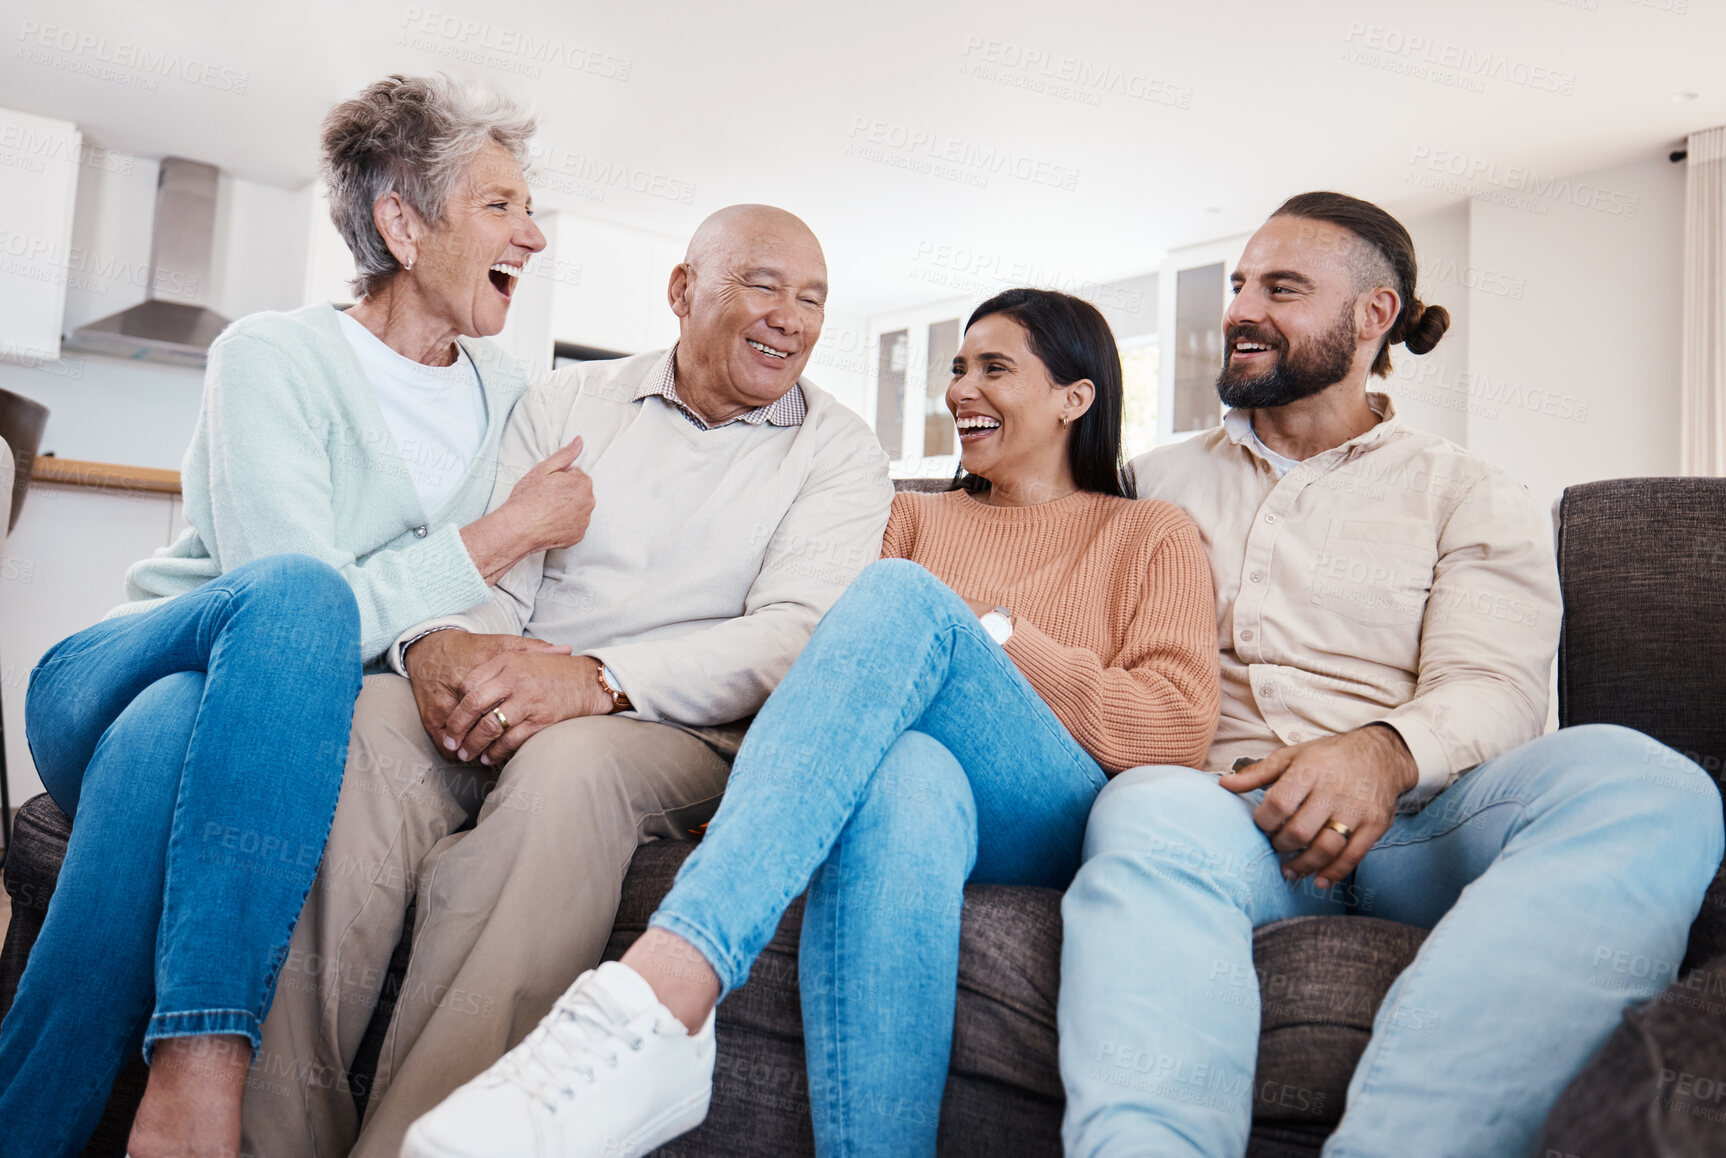 Buy stock photo Parents, couple and happy family bonding in a home or house together spending quality time sitting on a couch or sofa. Elderly, holiday and people relax and visit on vacation being carefree